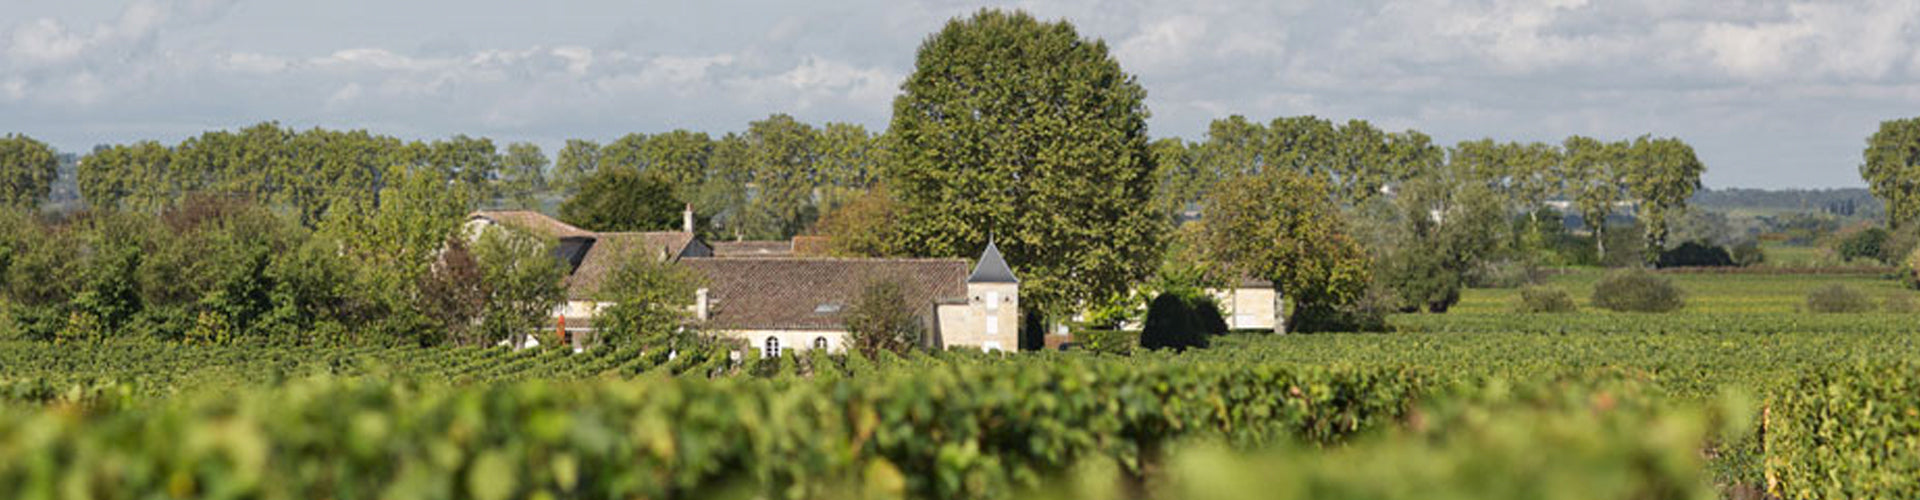 Château Bourgneuf and vineyards